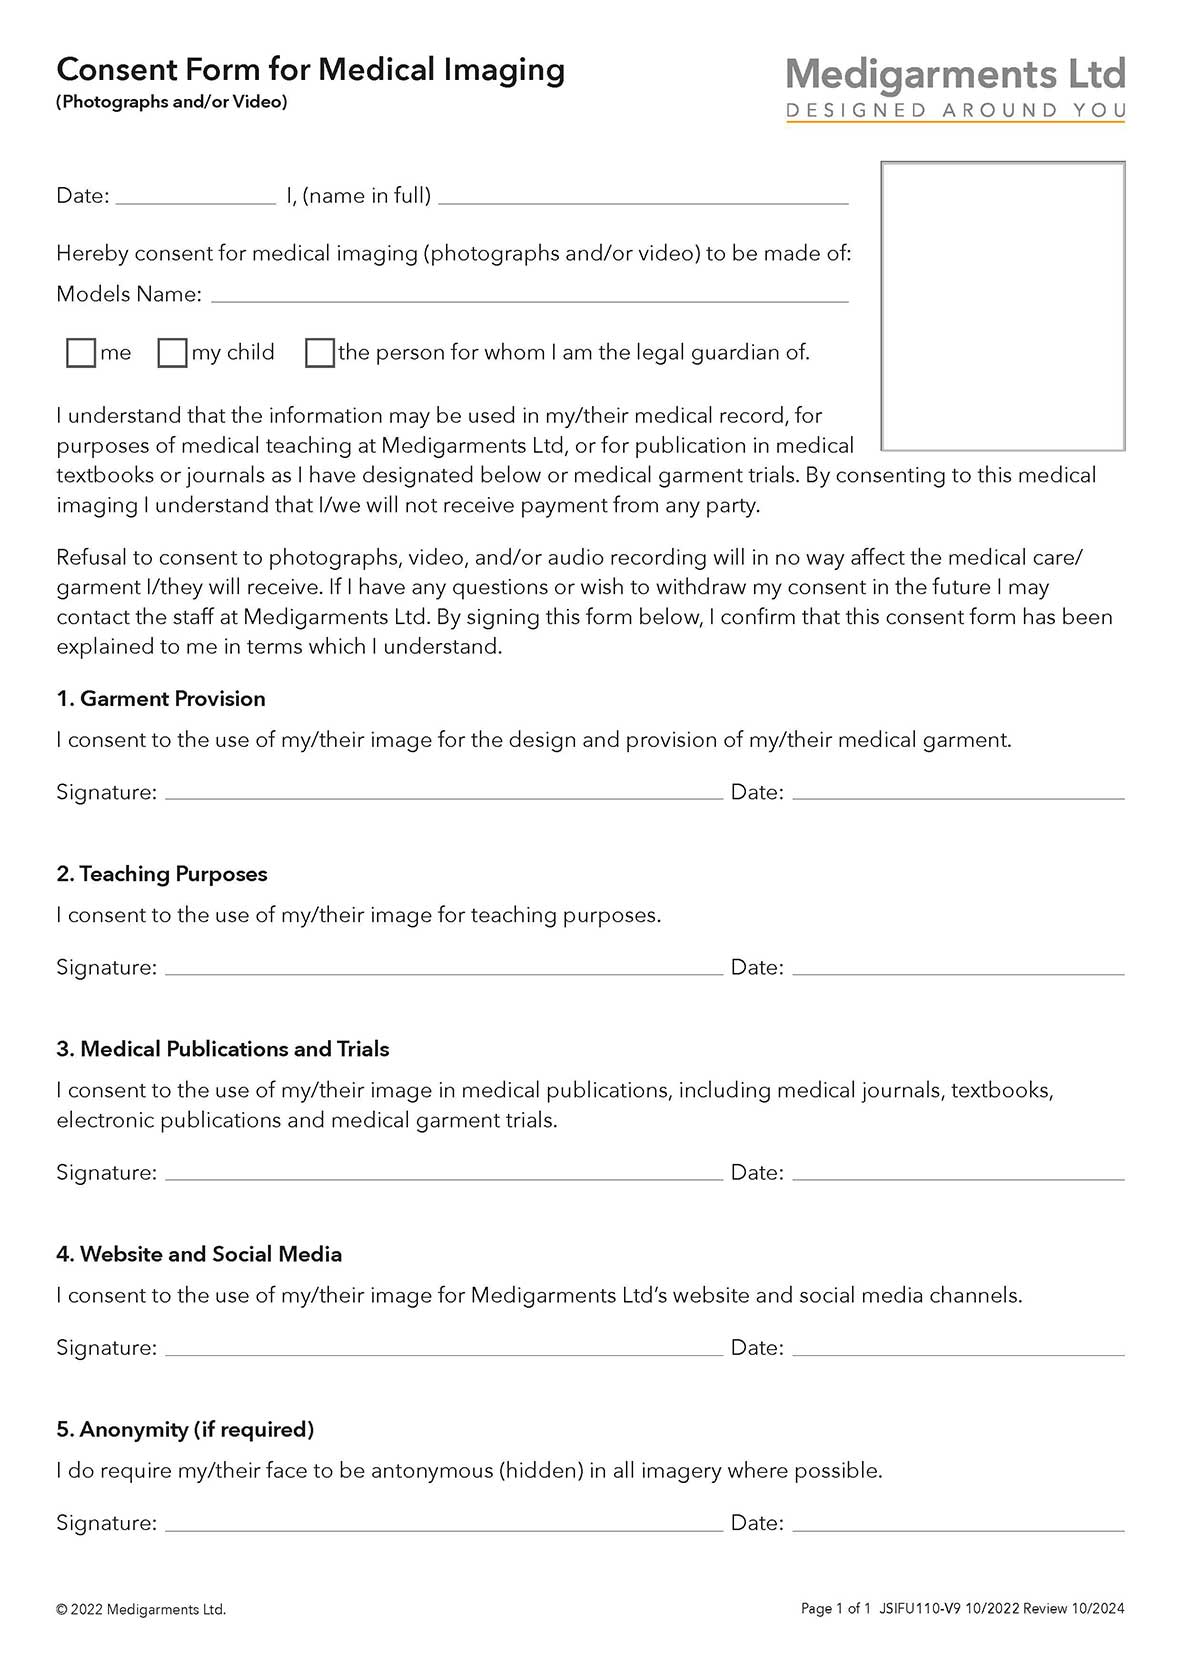 Consent form for medical imaging